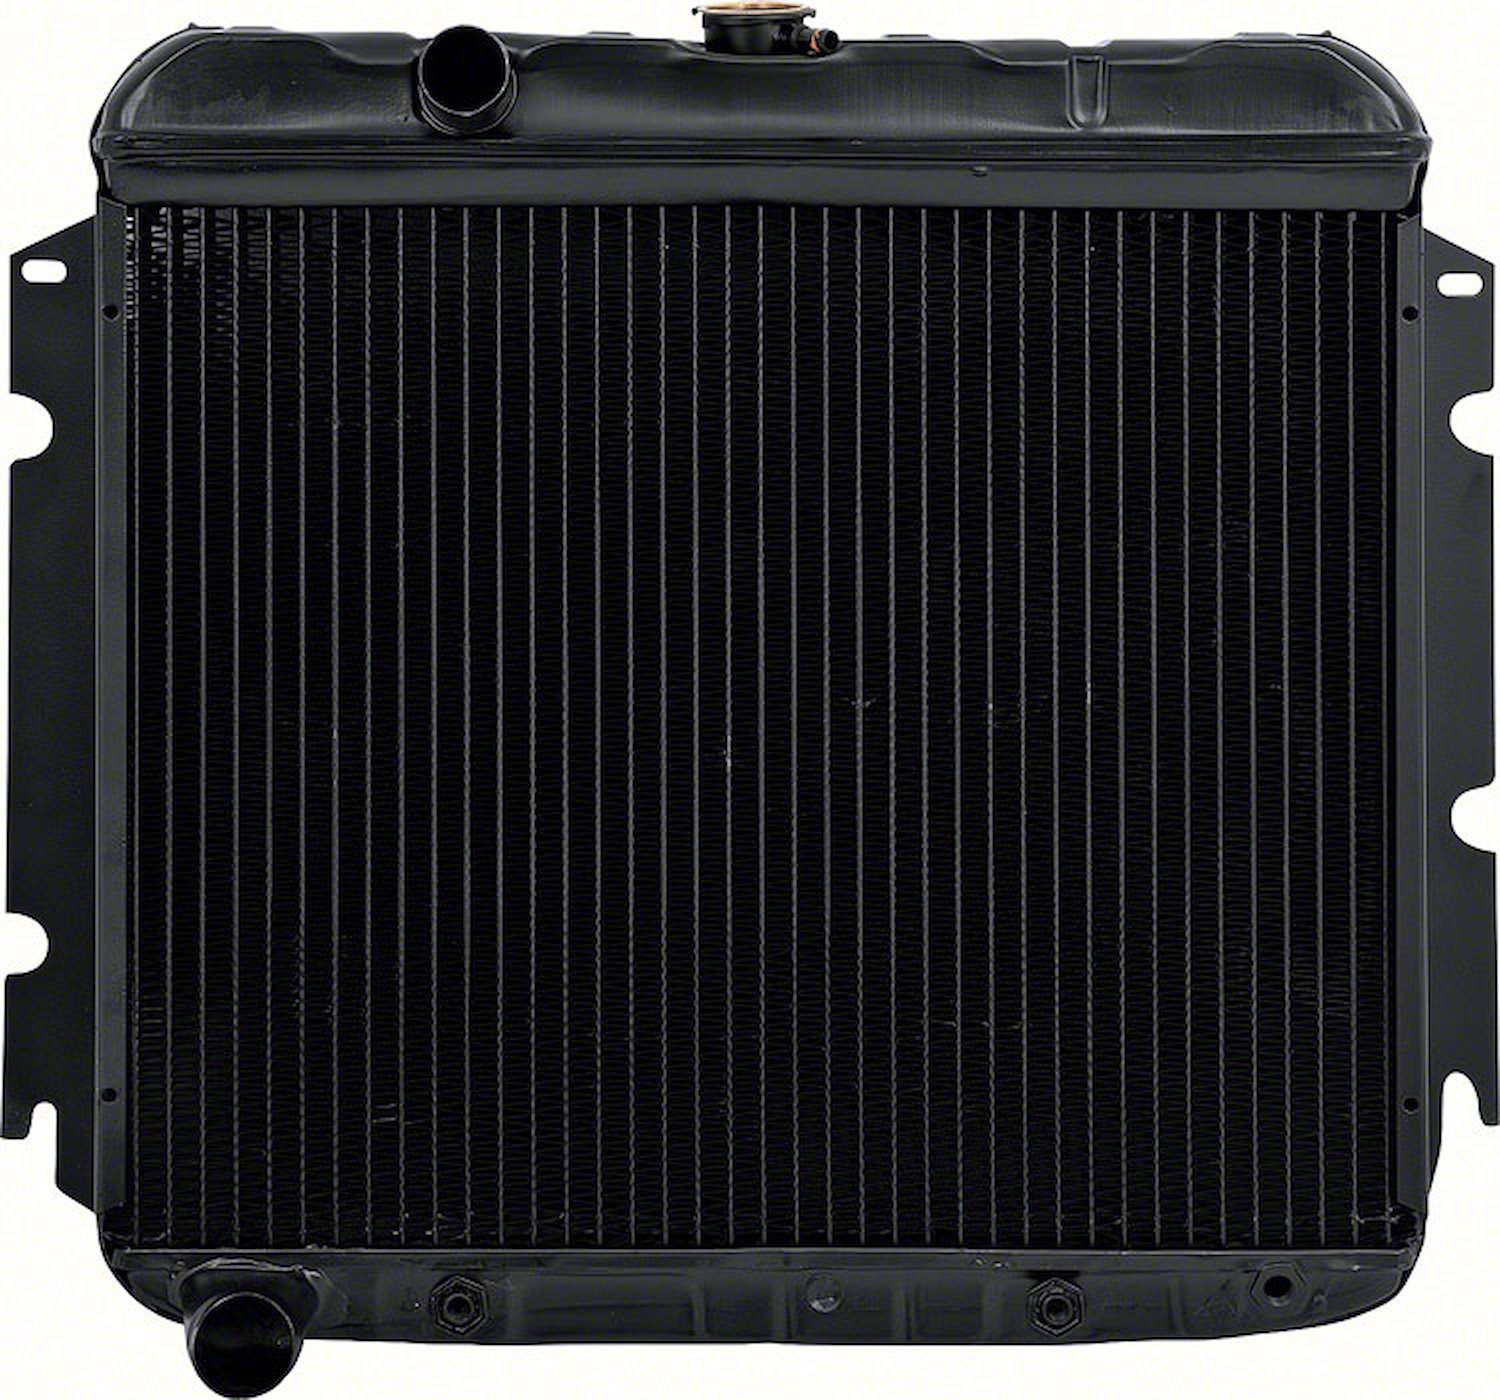 MA2259A Replacement Radiator 1967-69 Mopar A-Body Big Block V8 With Automatic Trans 4 Row